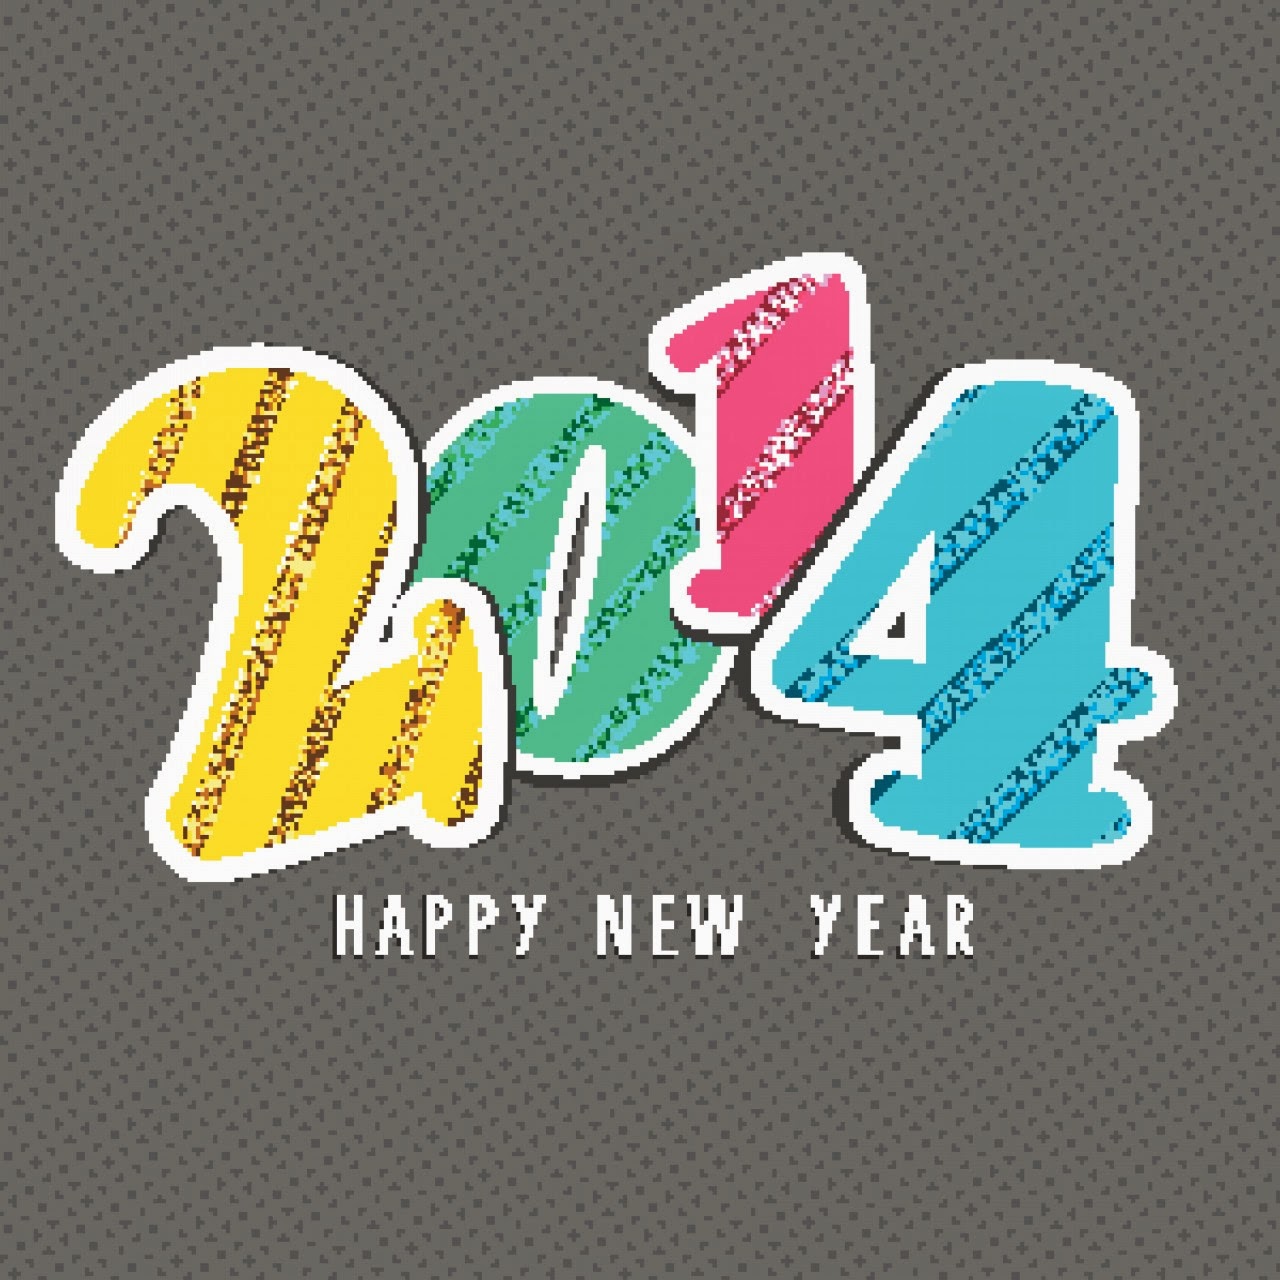 Look At This Creation Glamorous Happy New Year 2014 Card Design Hd Gallery 18 Bollywood Hd